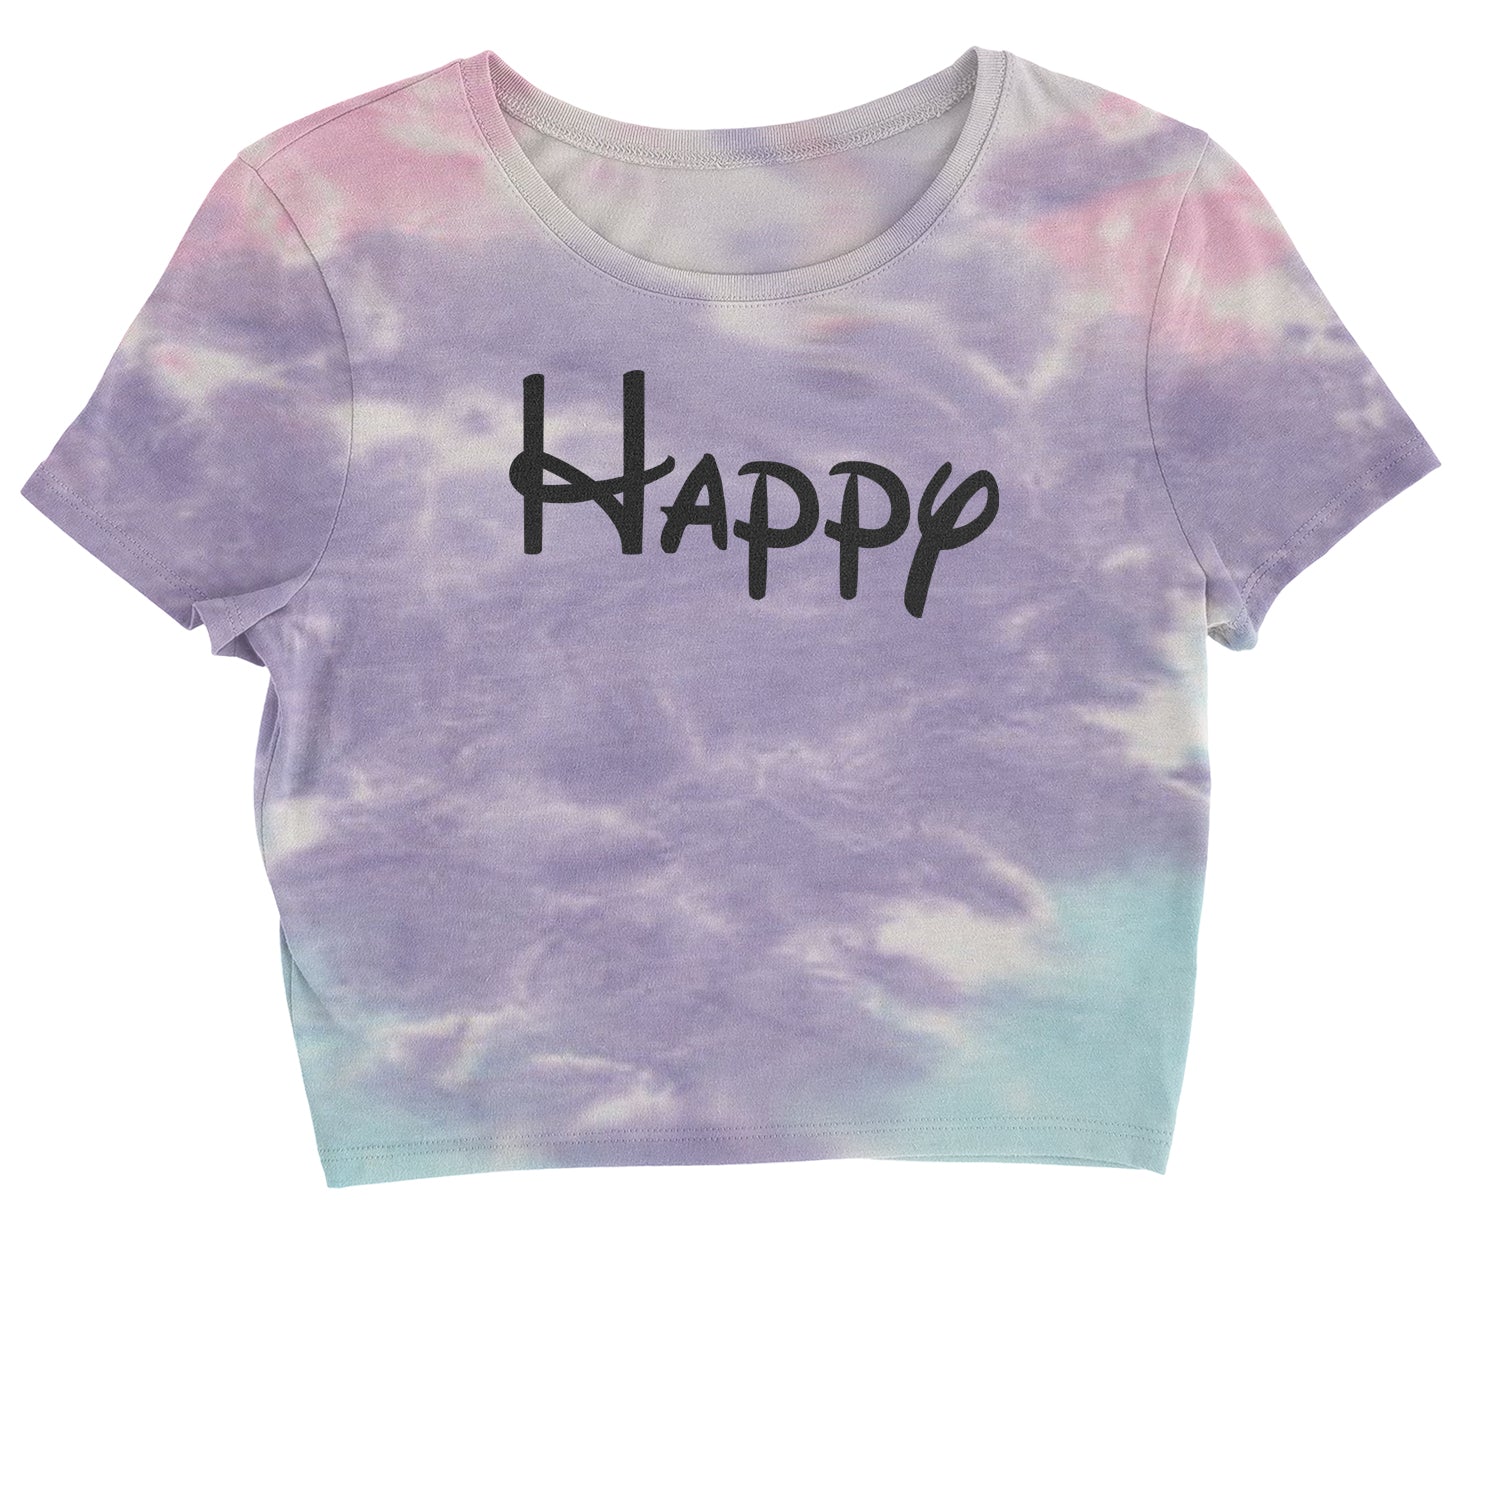 Happy - 7 Dwarfs Costume Cropped T-Shirt and, costume, dwarfs, group, halloween, matching, seven, snow, the, white by Expression Tees